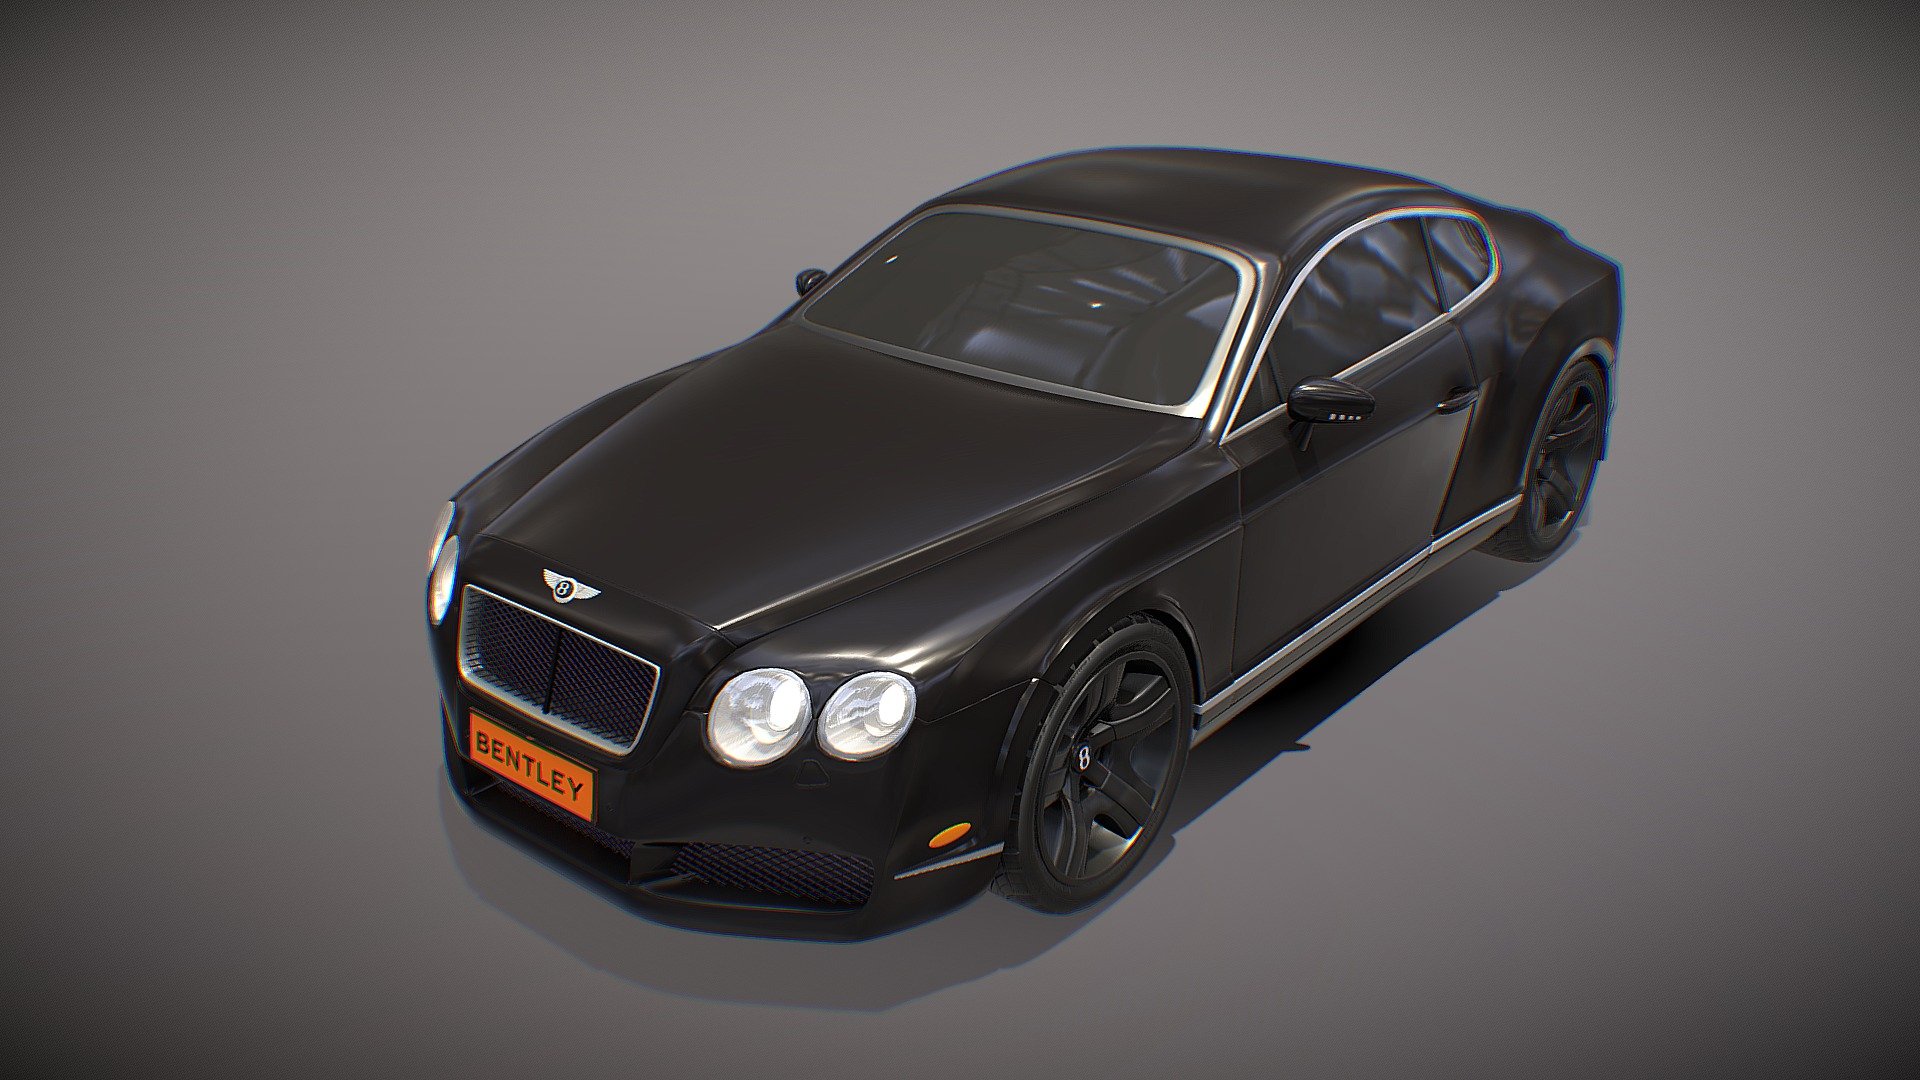 This is the High Detail Exterior Model of Bentley Continental GT. Modeling done in Blender and textured in substance painter.
Polycount:118554
Tricount: 236155
This Model have 4 Materials:
1.main body 2.body props 3.Wheels 4.Lights 5.Transparent Glass 3d model